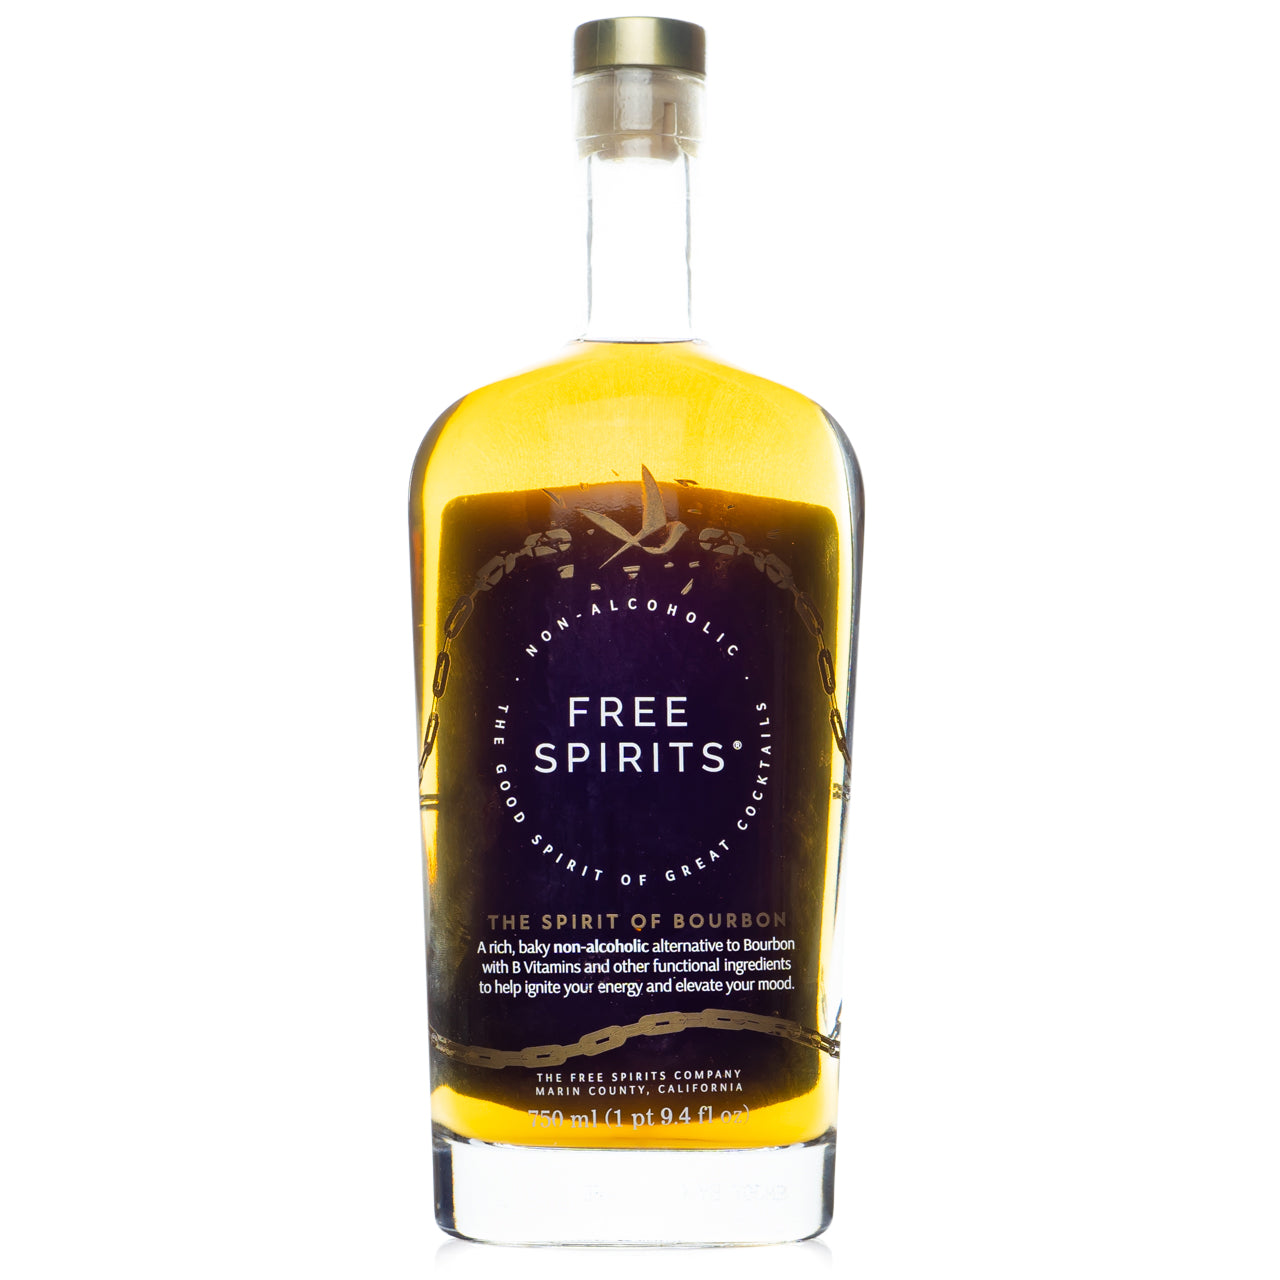 The Free Spirits Collection